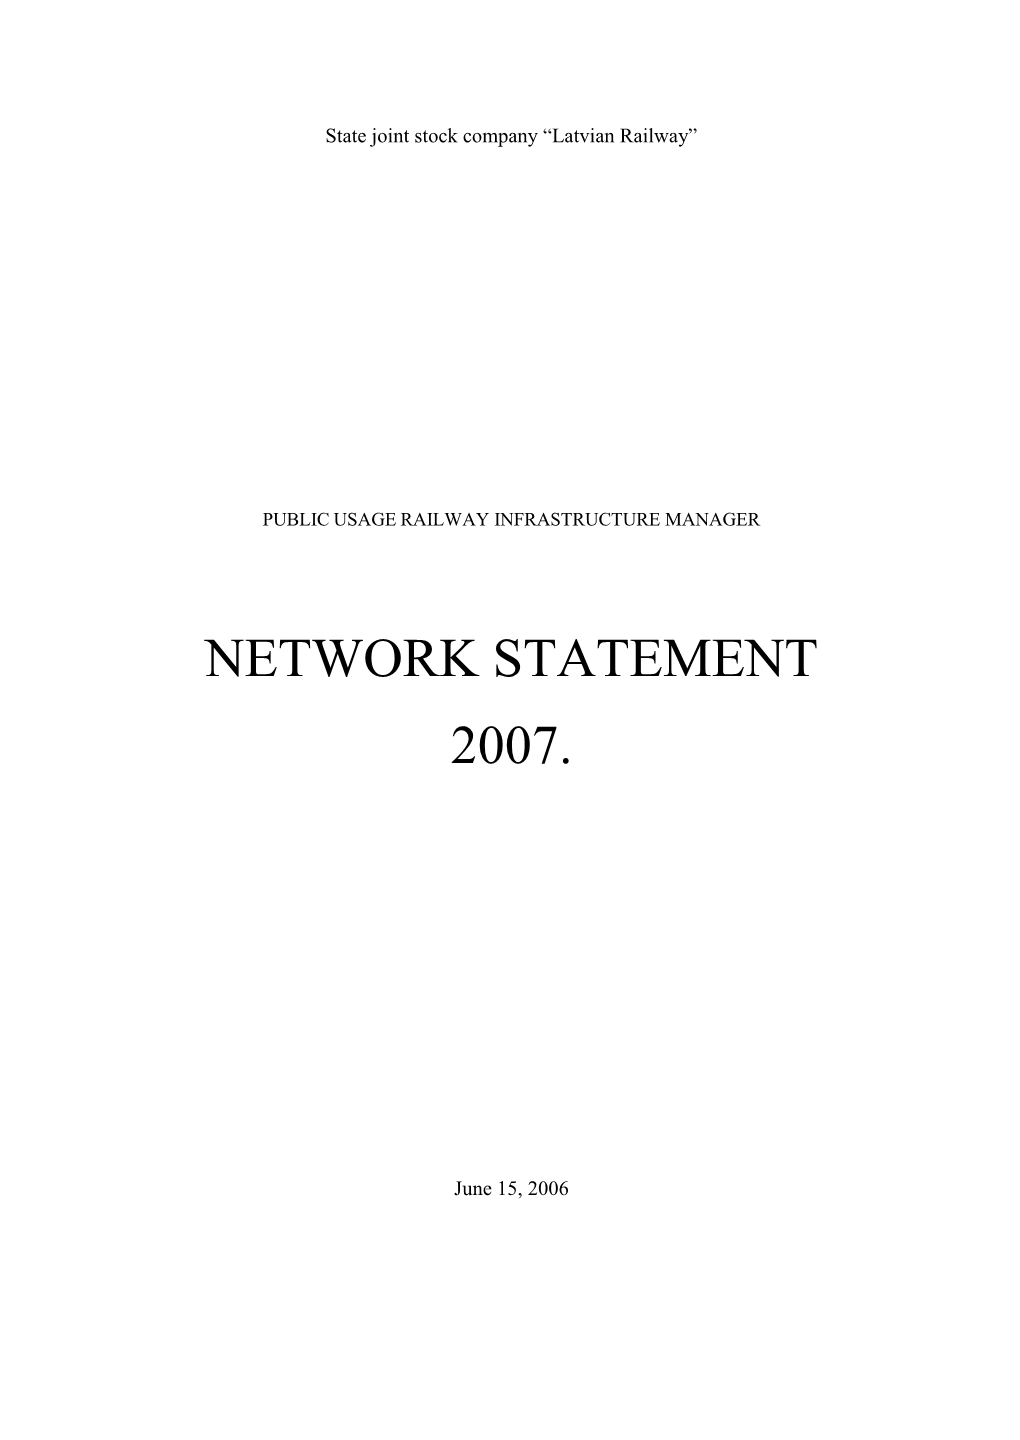 Network Statement 2007 Is Intended for the Timetable Period 27.05.2007- 24.05.2008